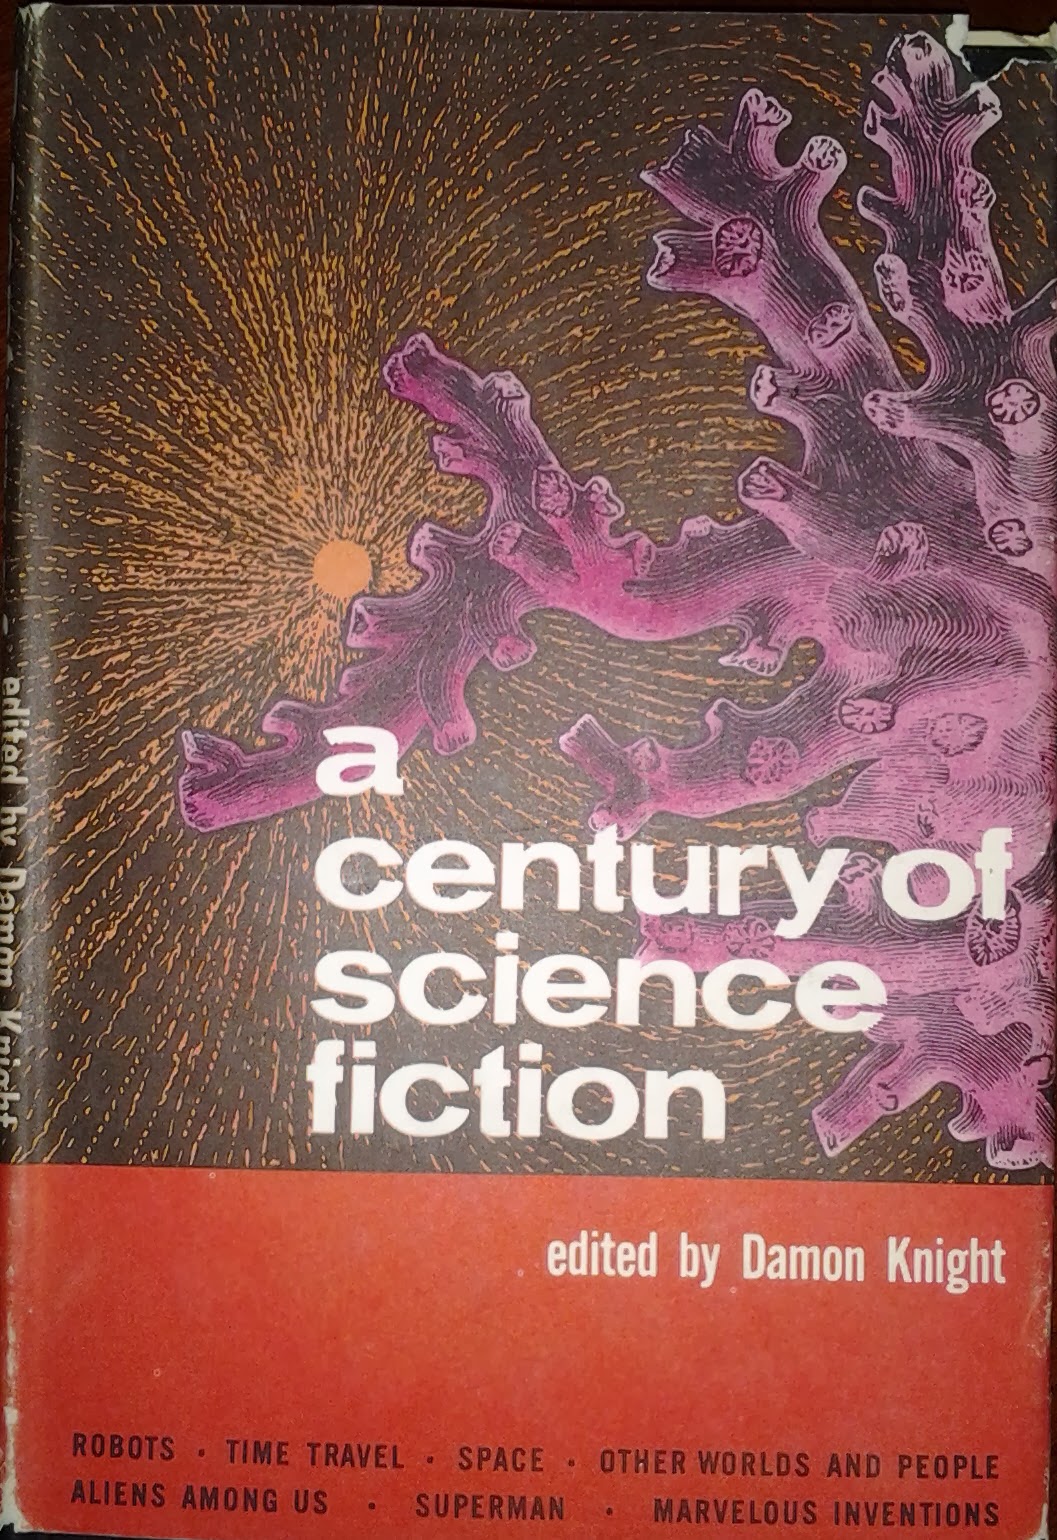 A Century of Science Fiction, edited by Damon Knight